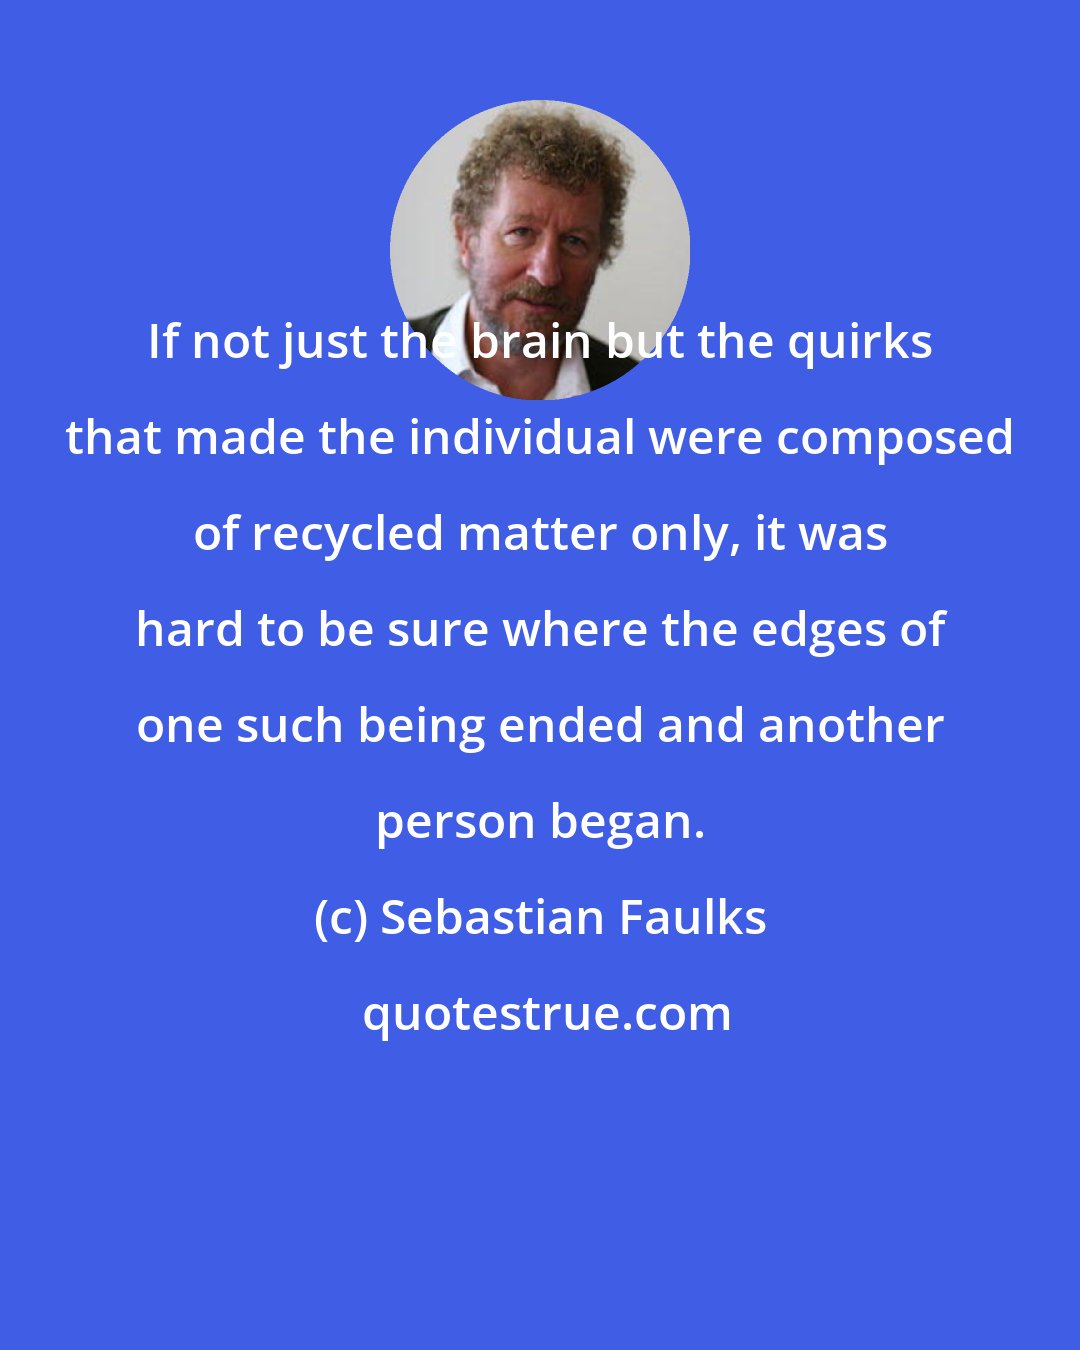 Sebastian Faulks: If not just the brain but the quirks that made the individual were composed of recycled matter only, it was hard to be sure where the edges of one such being ended and another person began.